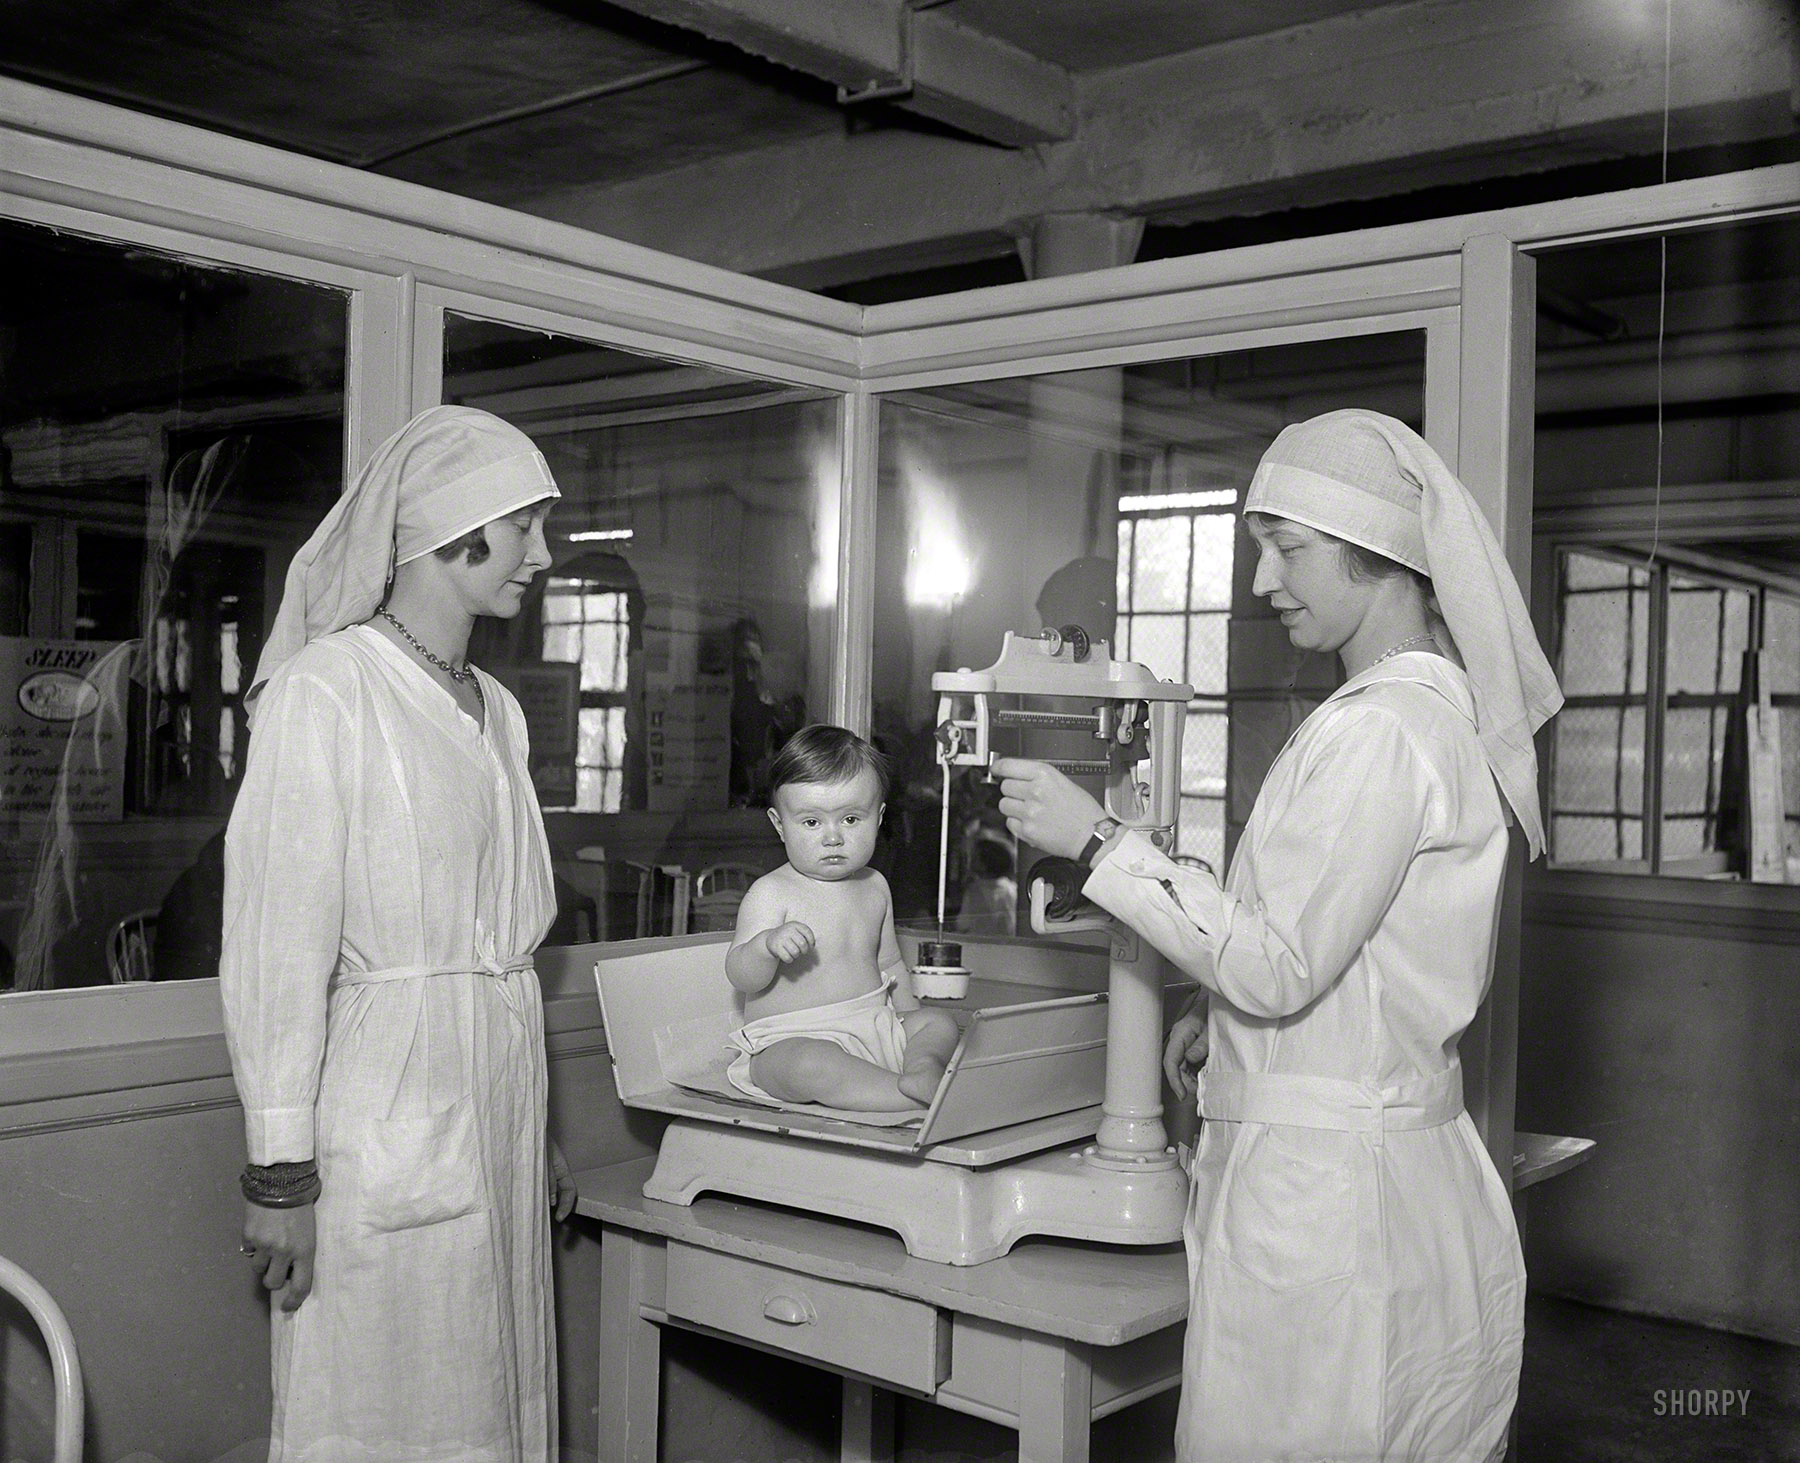 March 1930. Washington, D.C. "Junior League members at Children's Hospital." Baby's first word: Meh. Harris & Ewing Collection glass negative. View full size.